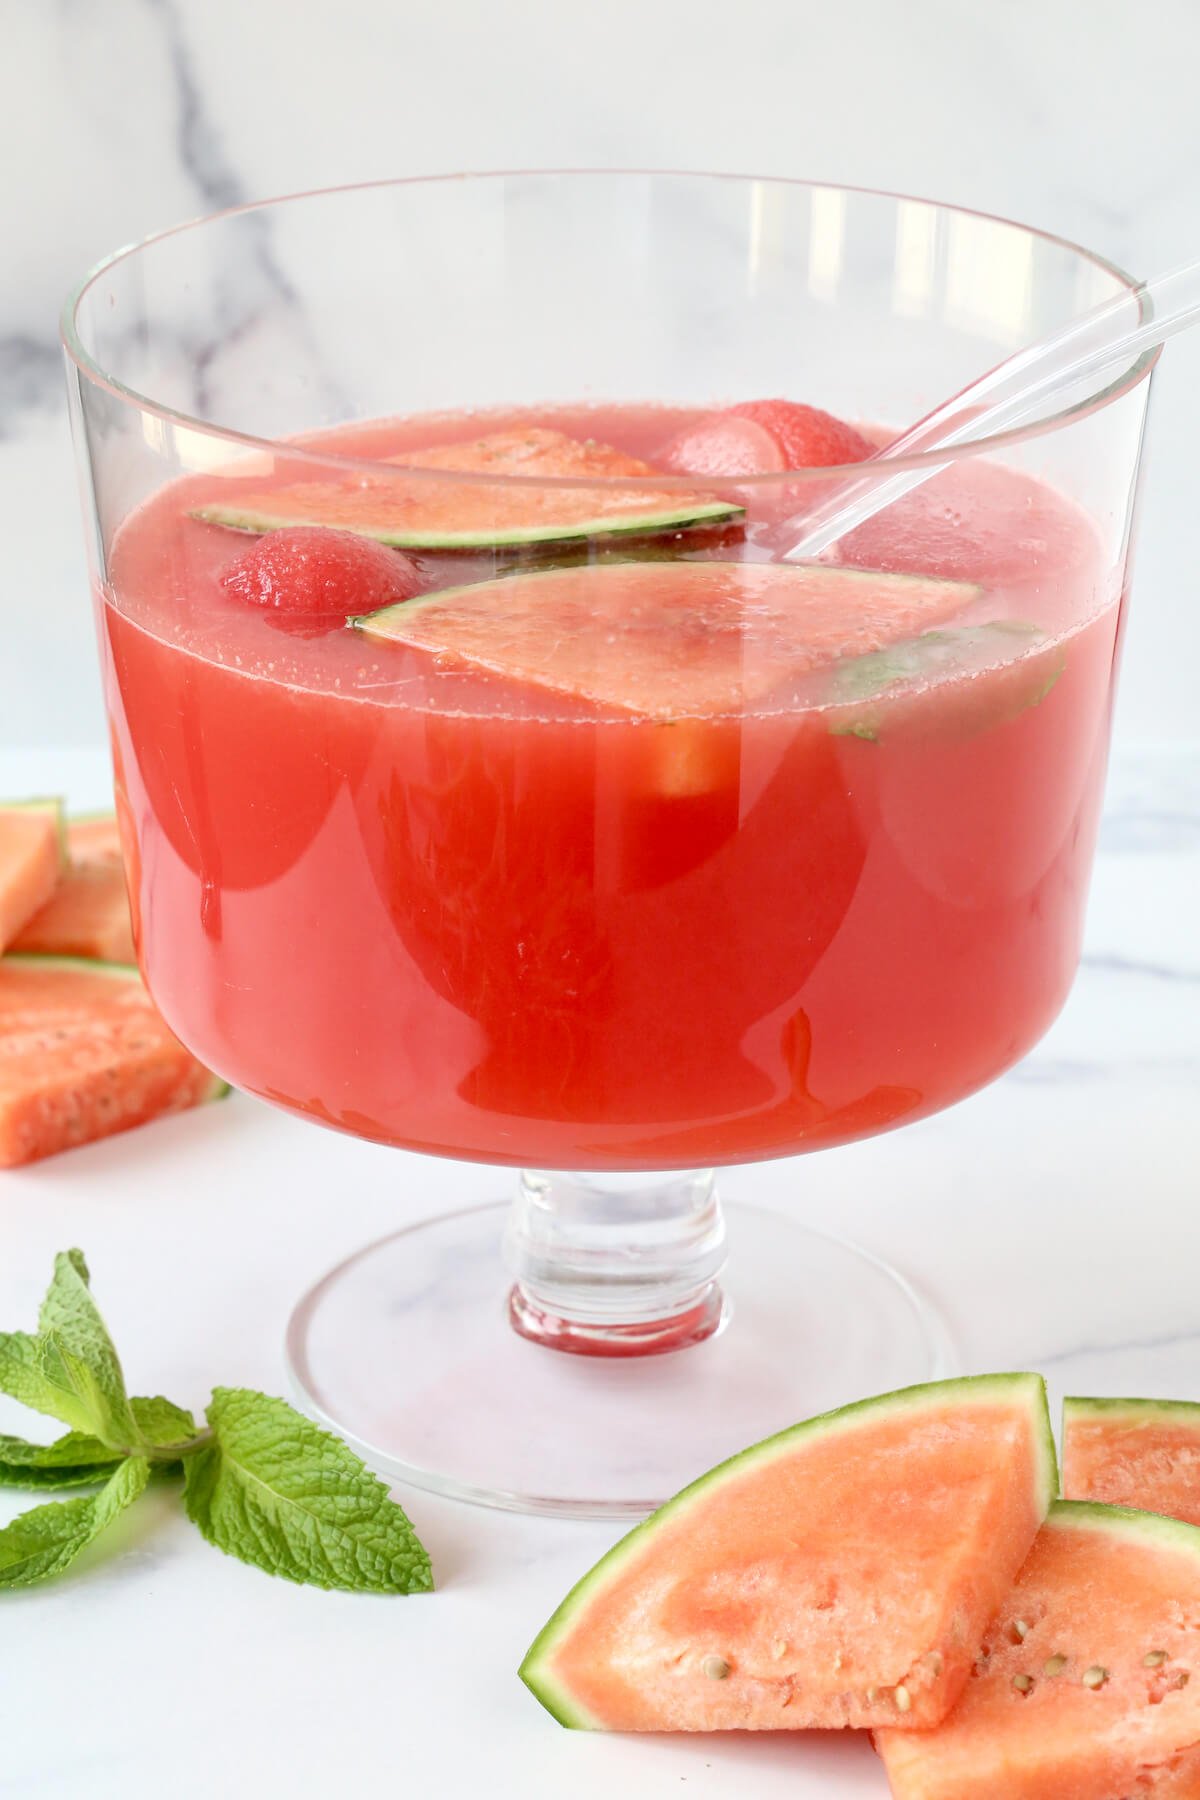 A punch bowl filled with a red liquid, sliced watermelons and watermelon ice cubes 